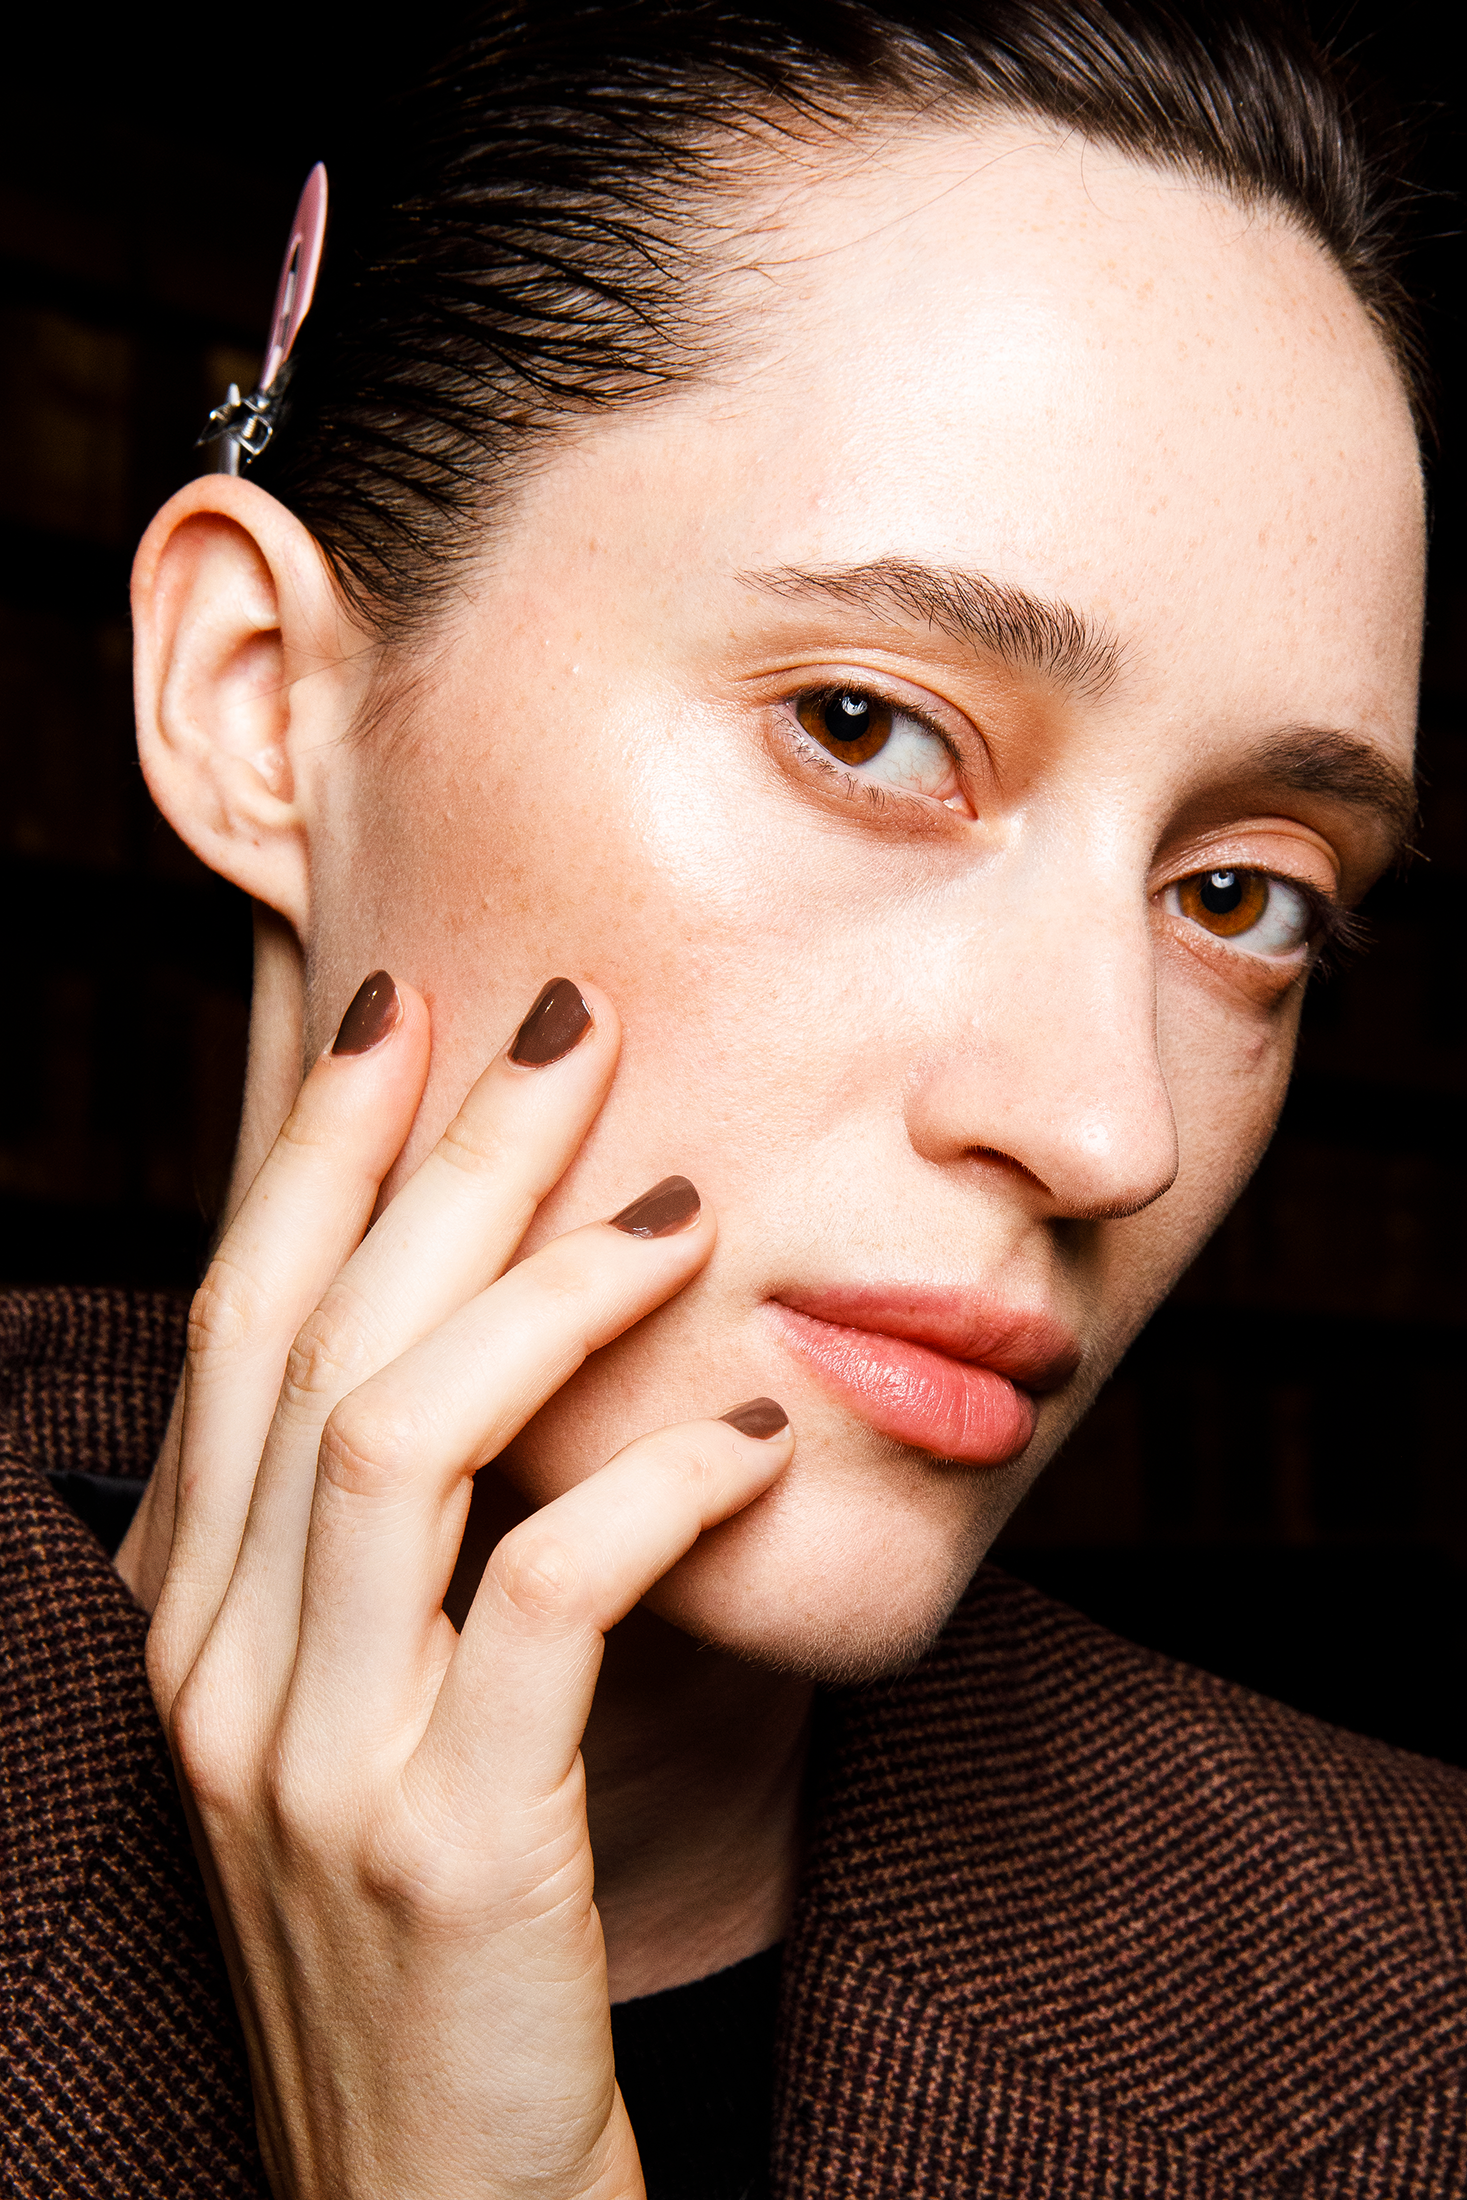 50 Hottest Summer Nail Colors to Try in 2022 - The Trend Spotter